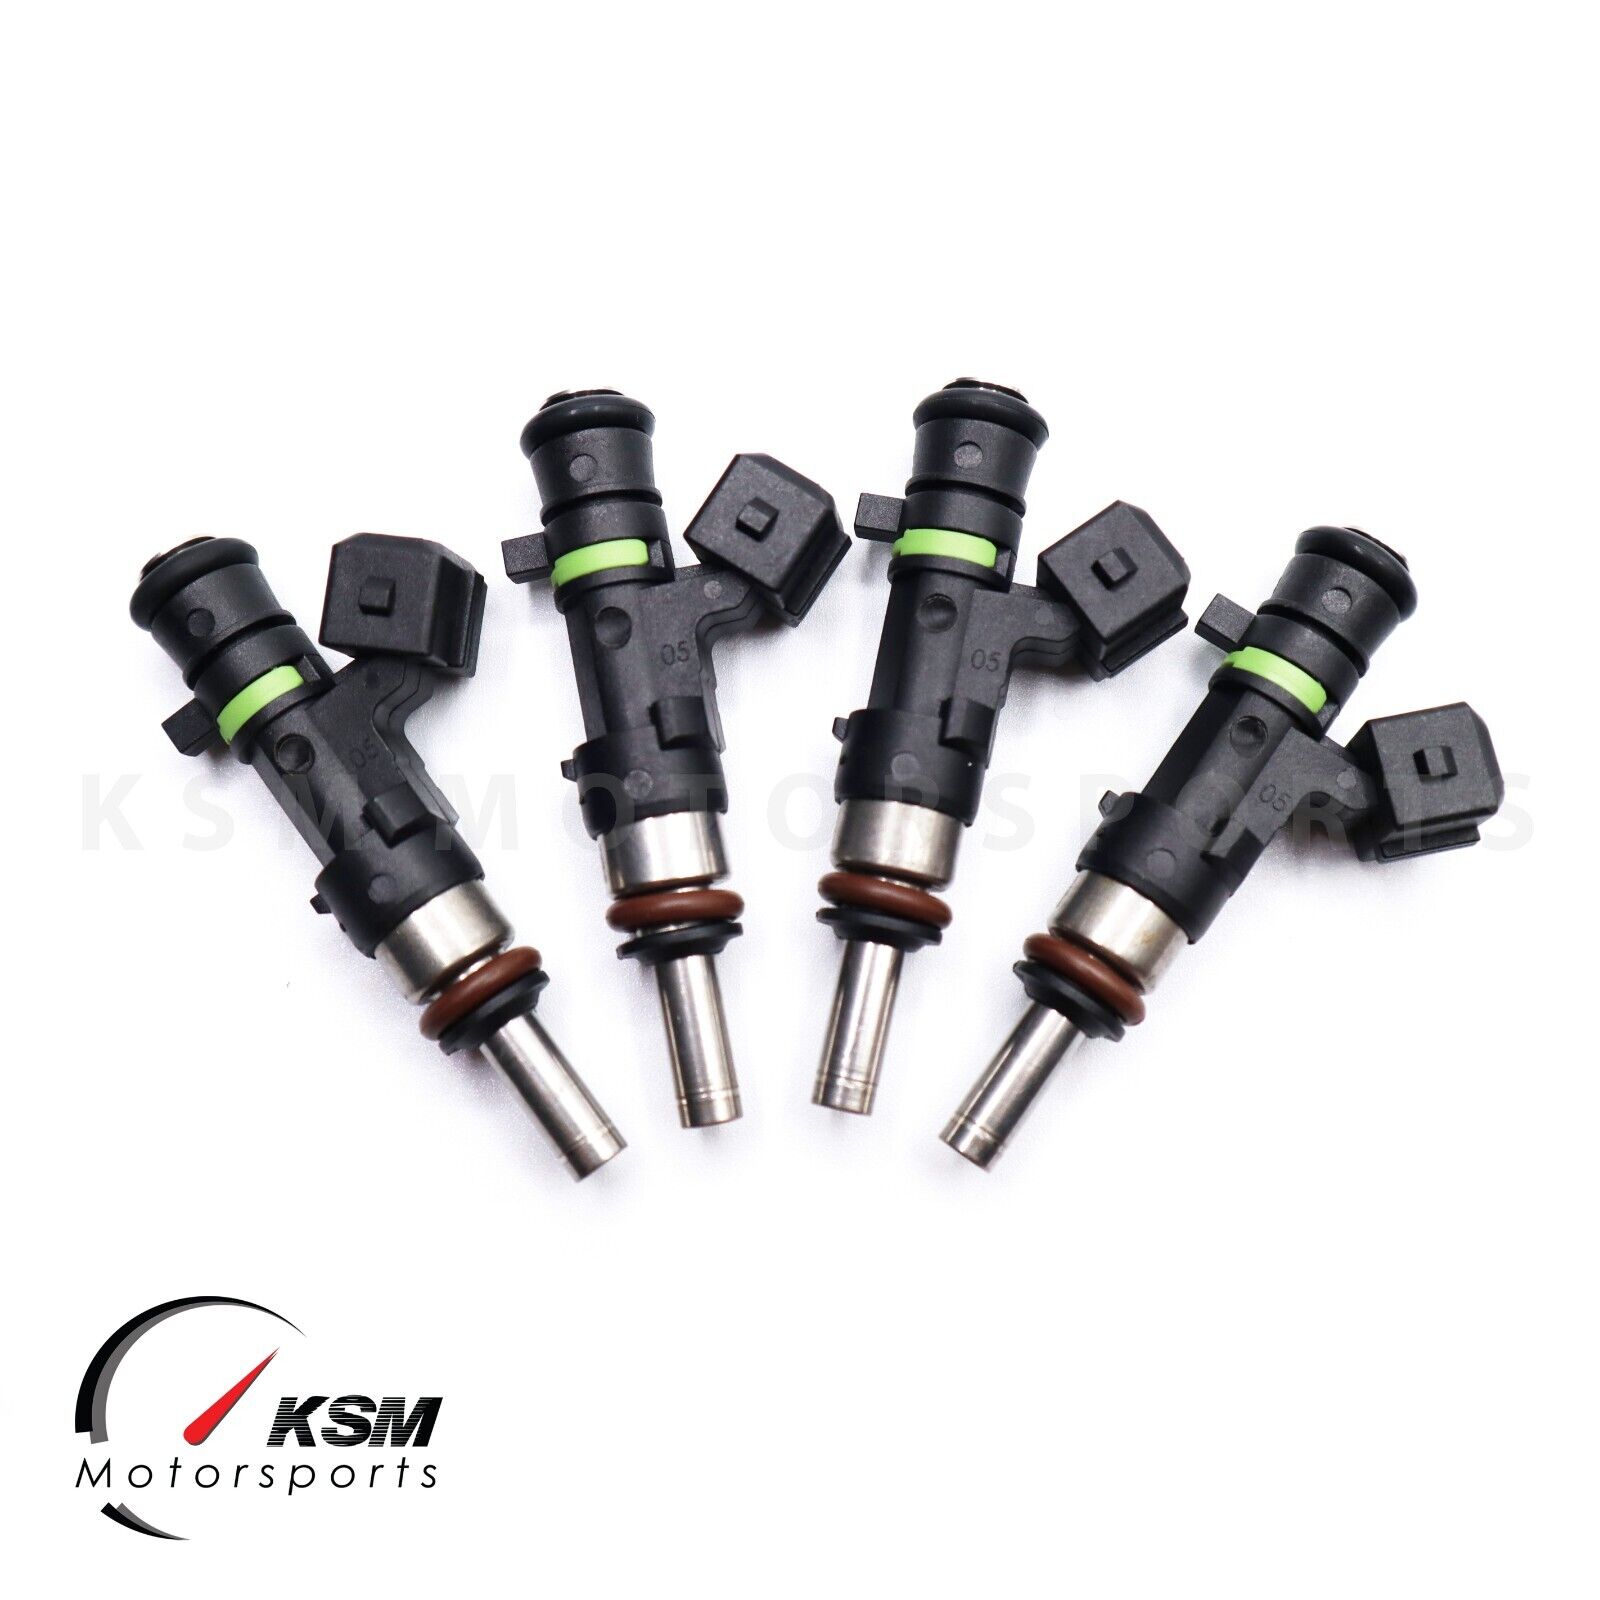 4 x 390cc Fuel Injectors Uprated for Abarth 500 595 695 fit Bosch 0280158124